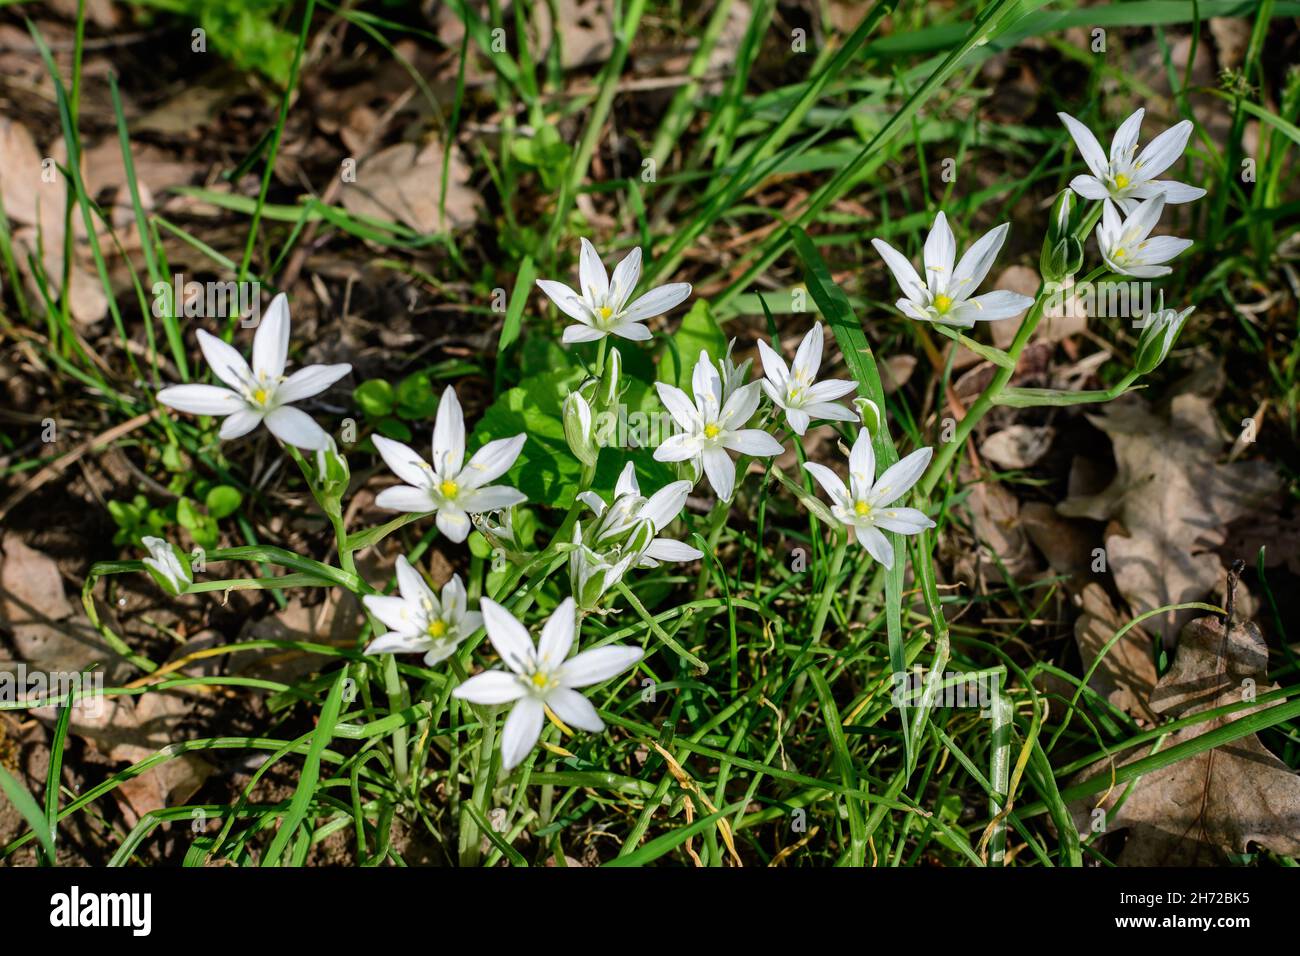 Many delicate small white flowers of Ornithogalum umbellatum plant commonly known as  the garden star-of-Bethlehem, grass lily, nap-at-noon, or eleven Stock Photo